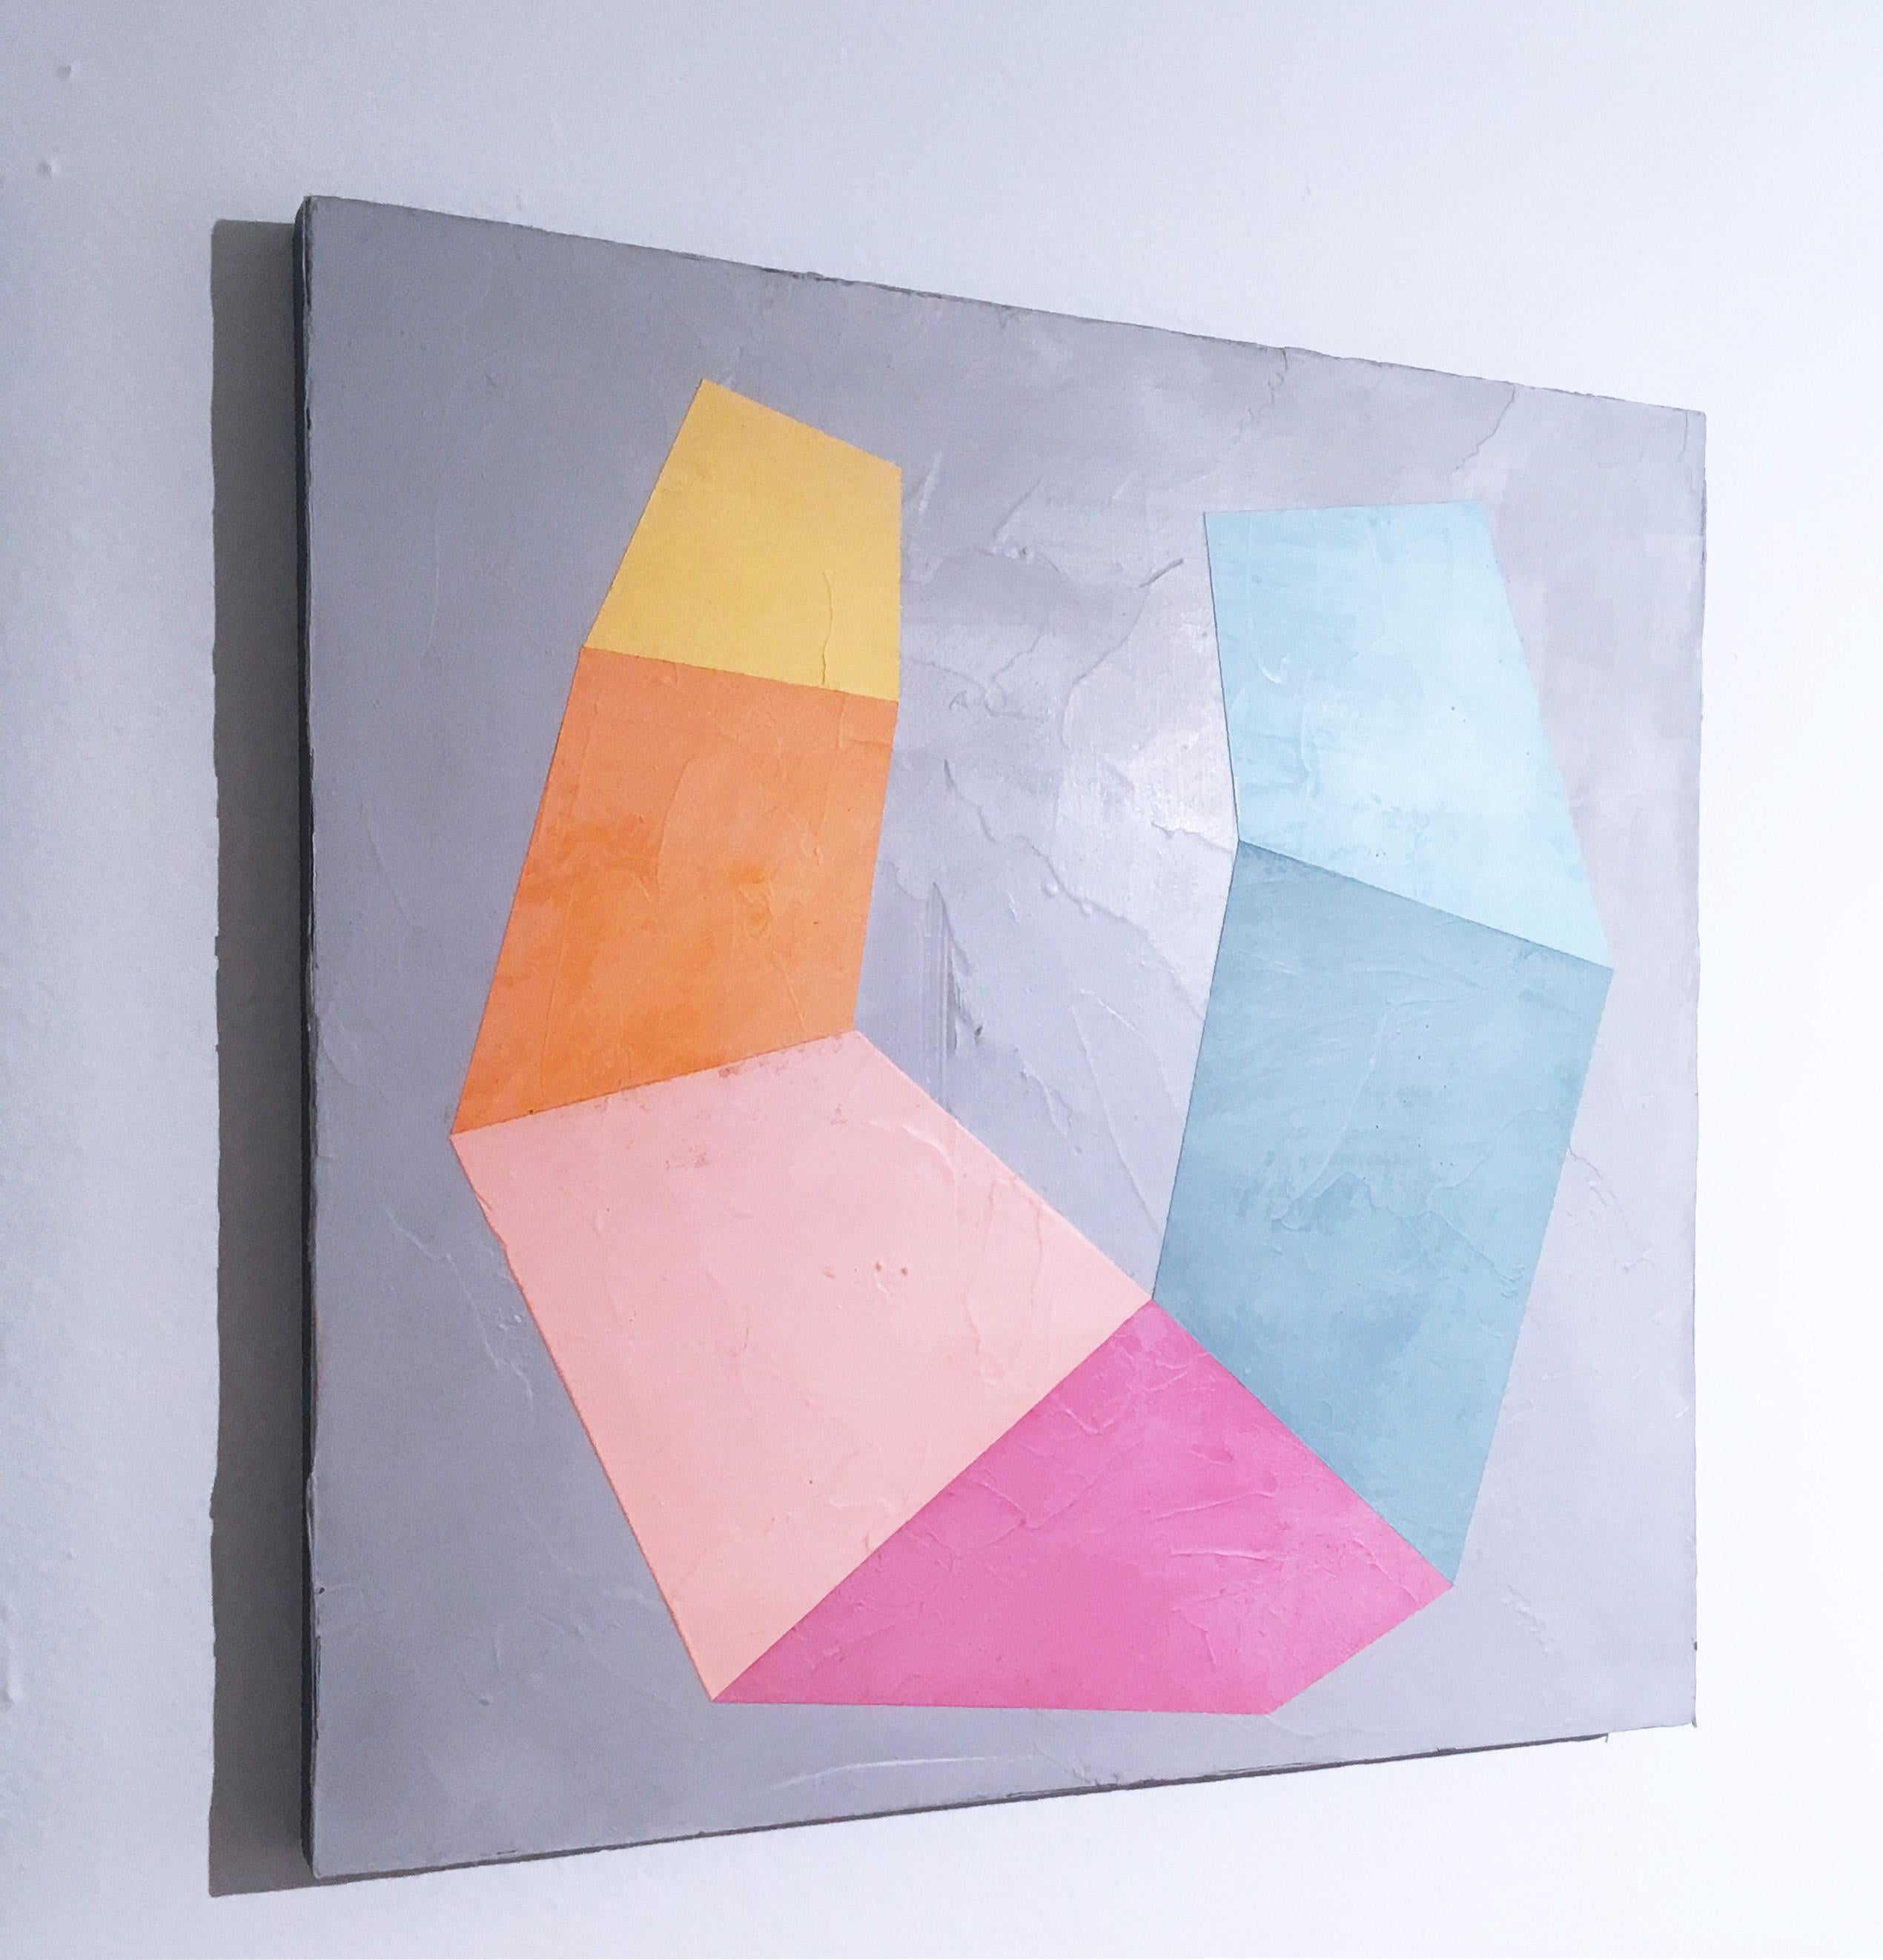 Something Like Happiness II, 2019, Abstract geometry, non-objective, plaster - Abstract Geometric Mixed Media Art by Kati Vilim